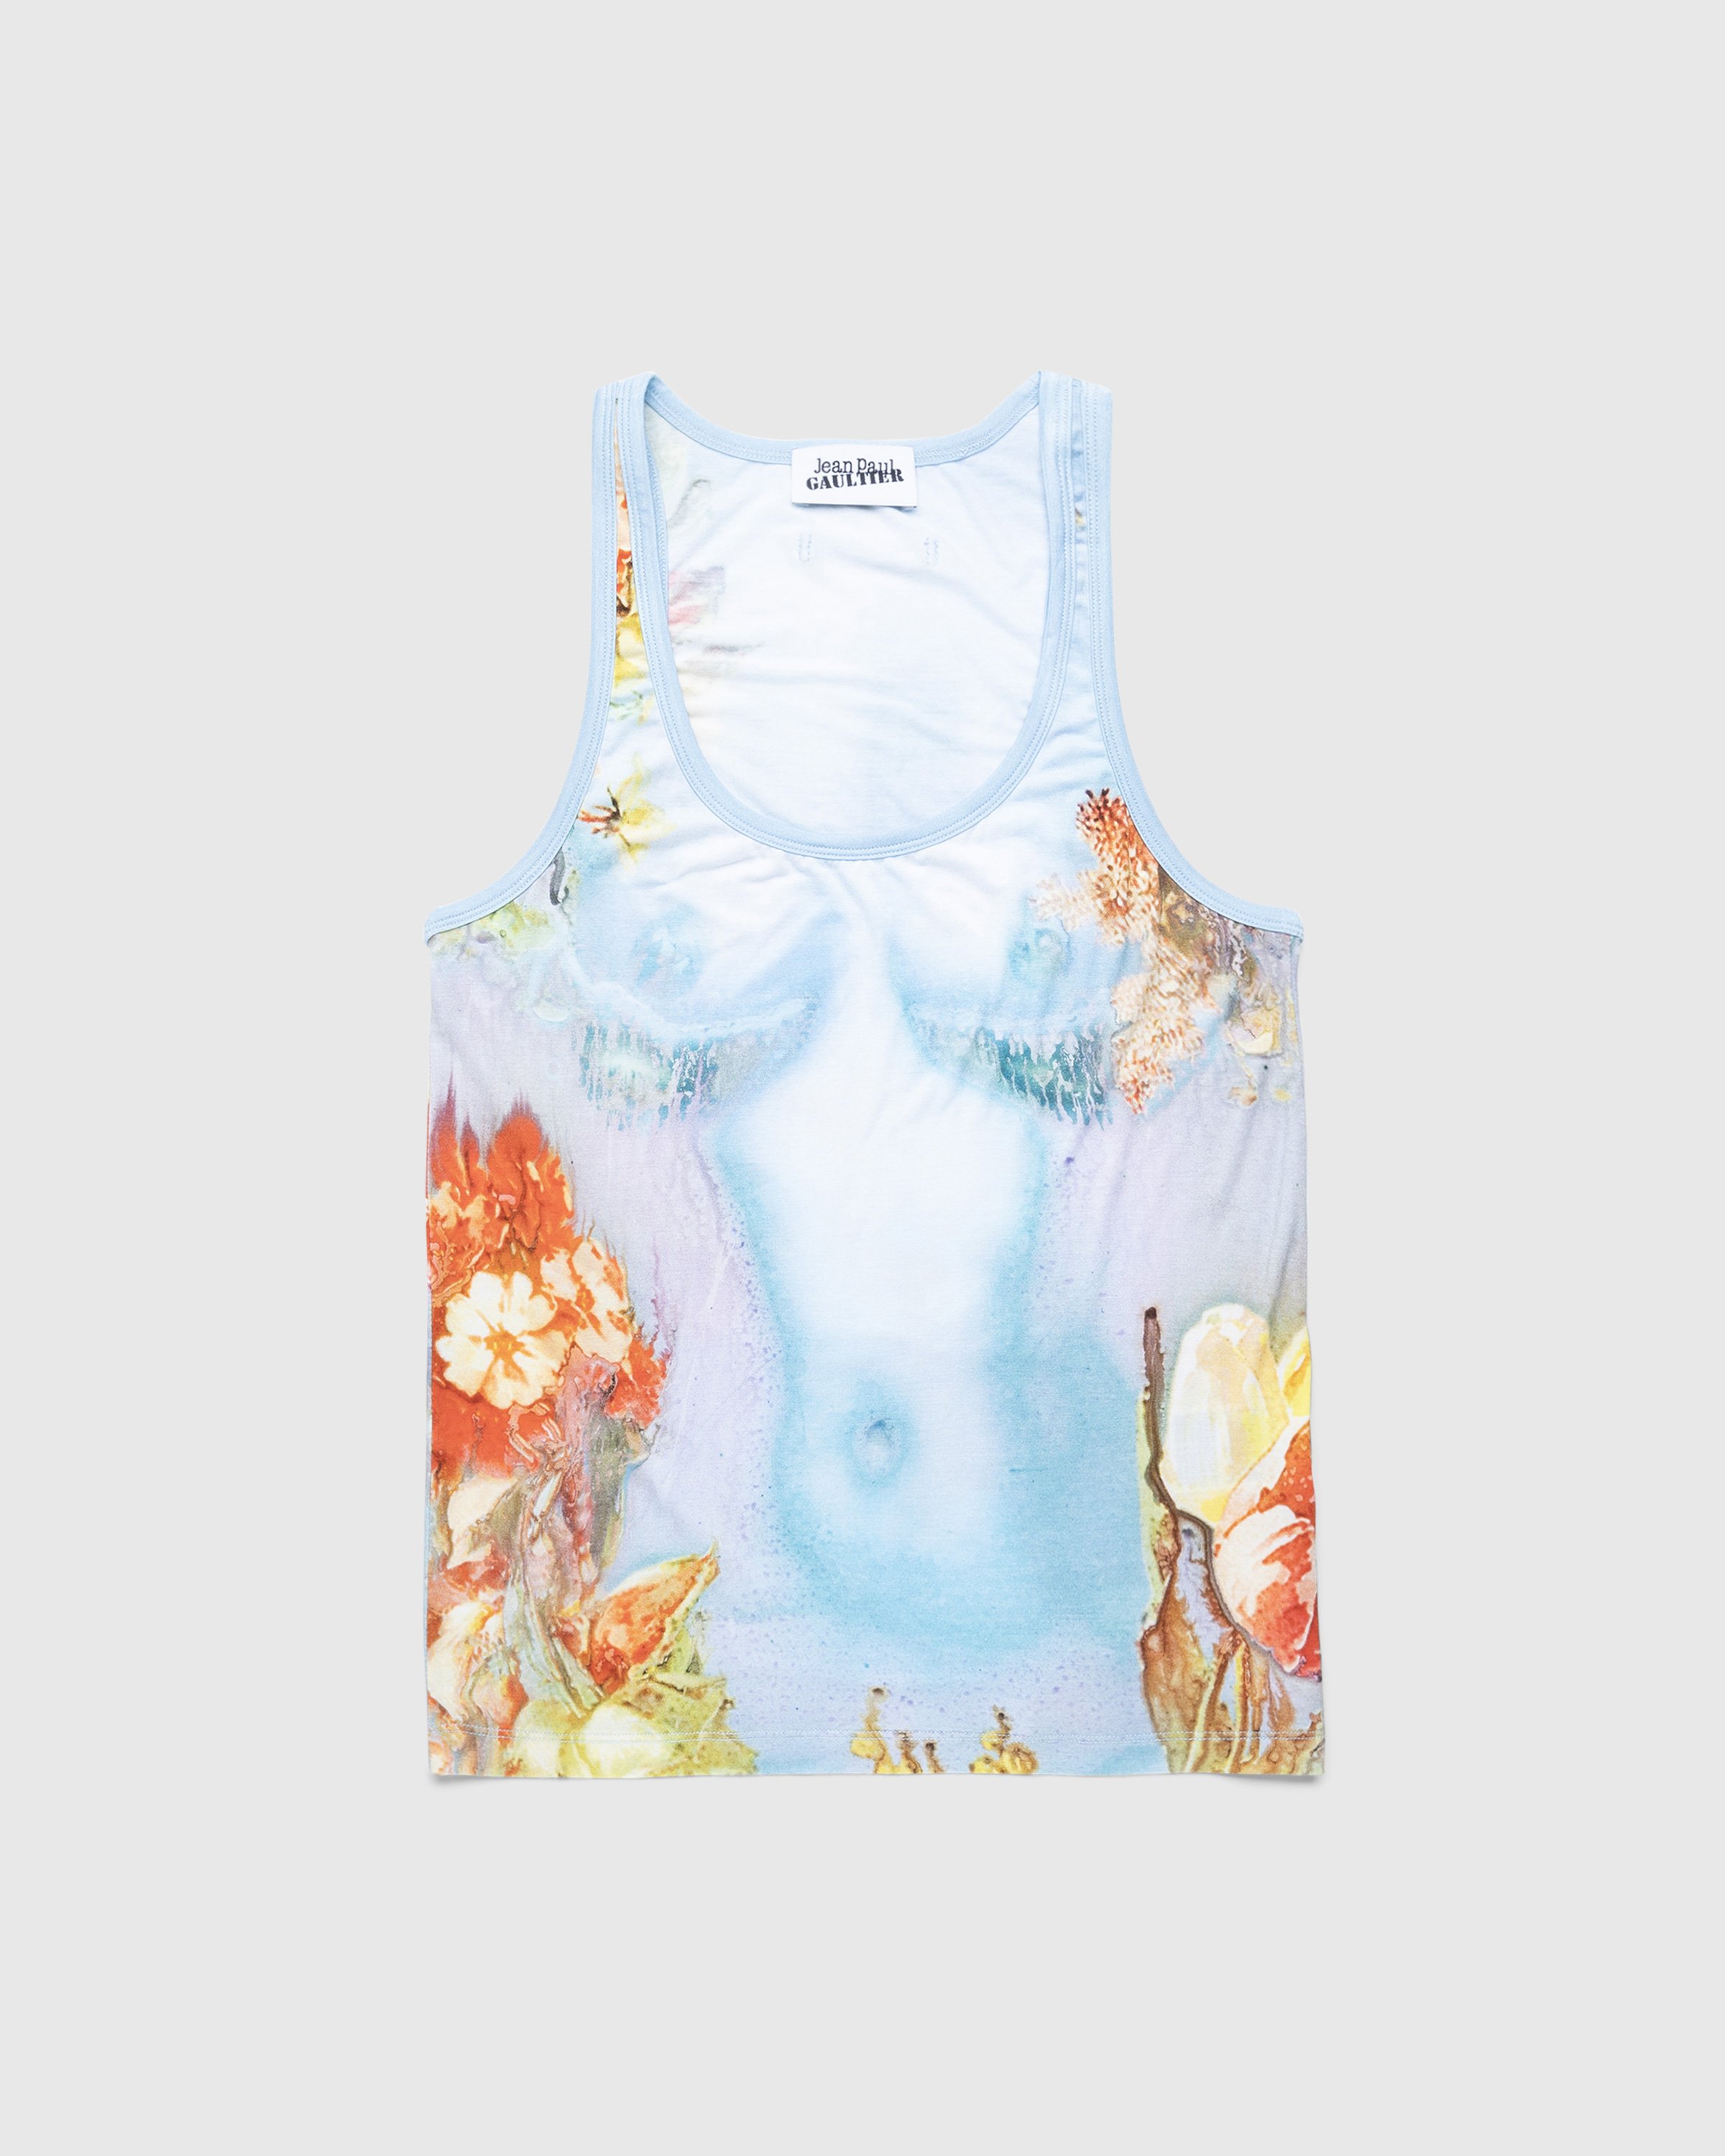 Jean Paul Gaultier - Printed Body Flowers Tank Top Blue - Clothing - Blue - Image 1